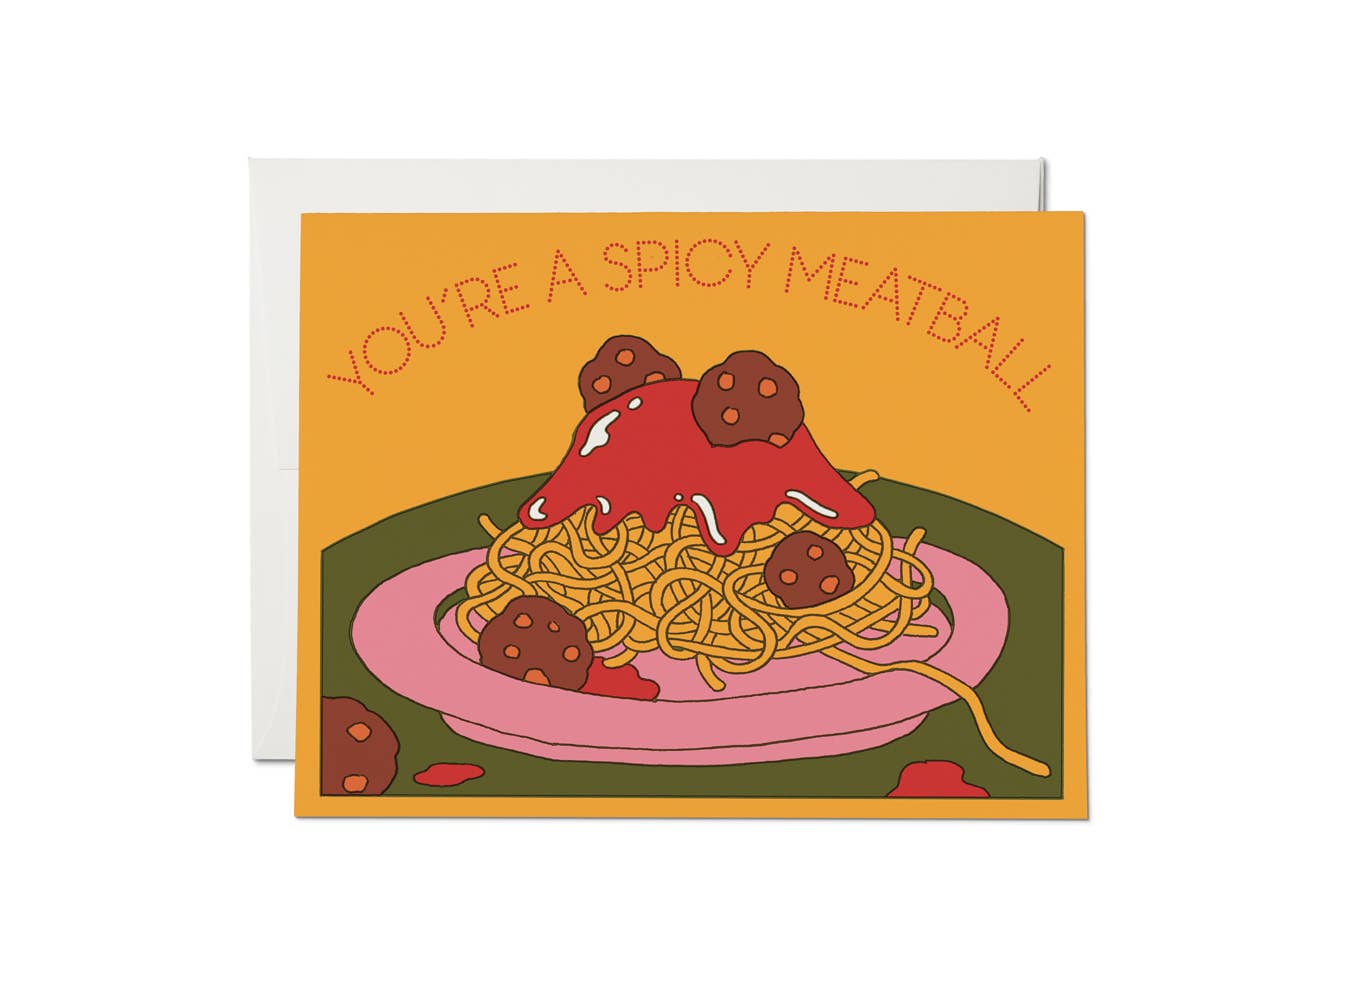 Spaghetti and meatballs greeting card -- plate of spaghetti & meatballs that reads "You're A Spicy Meatball" above it 